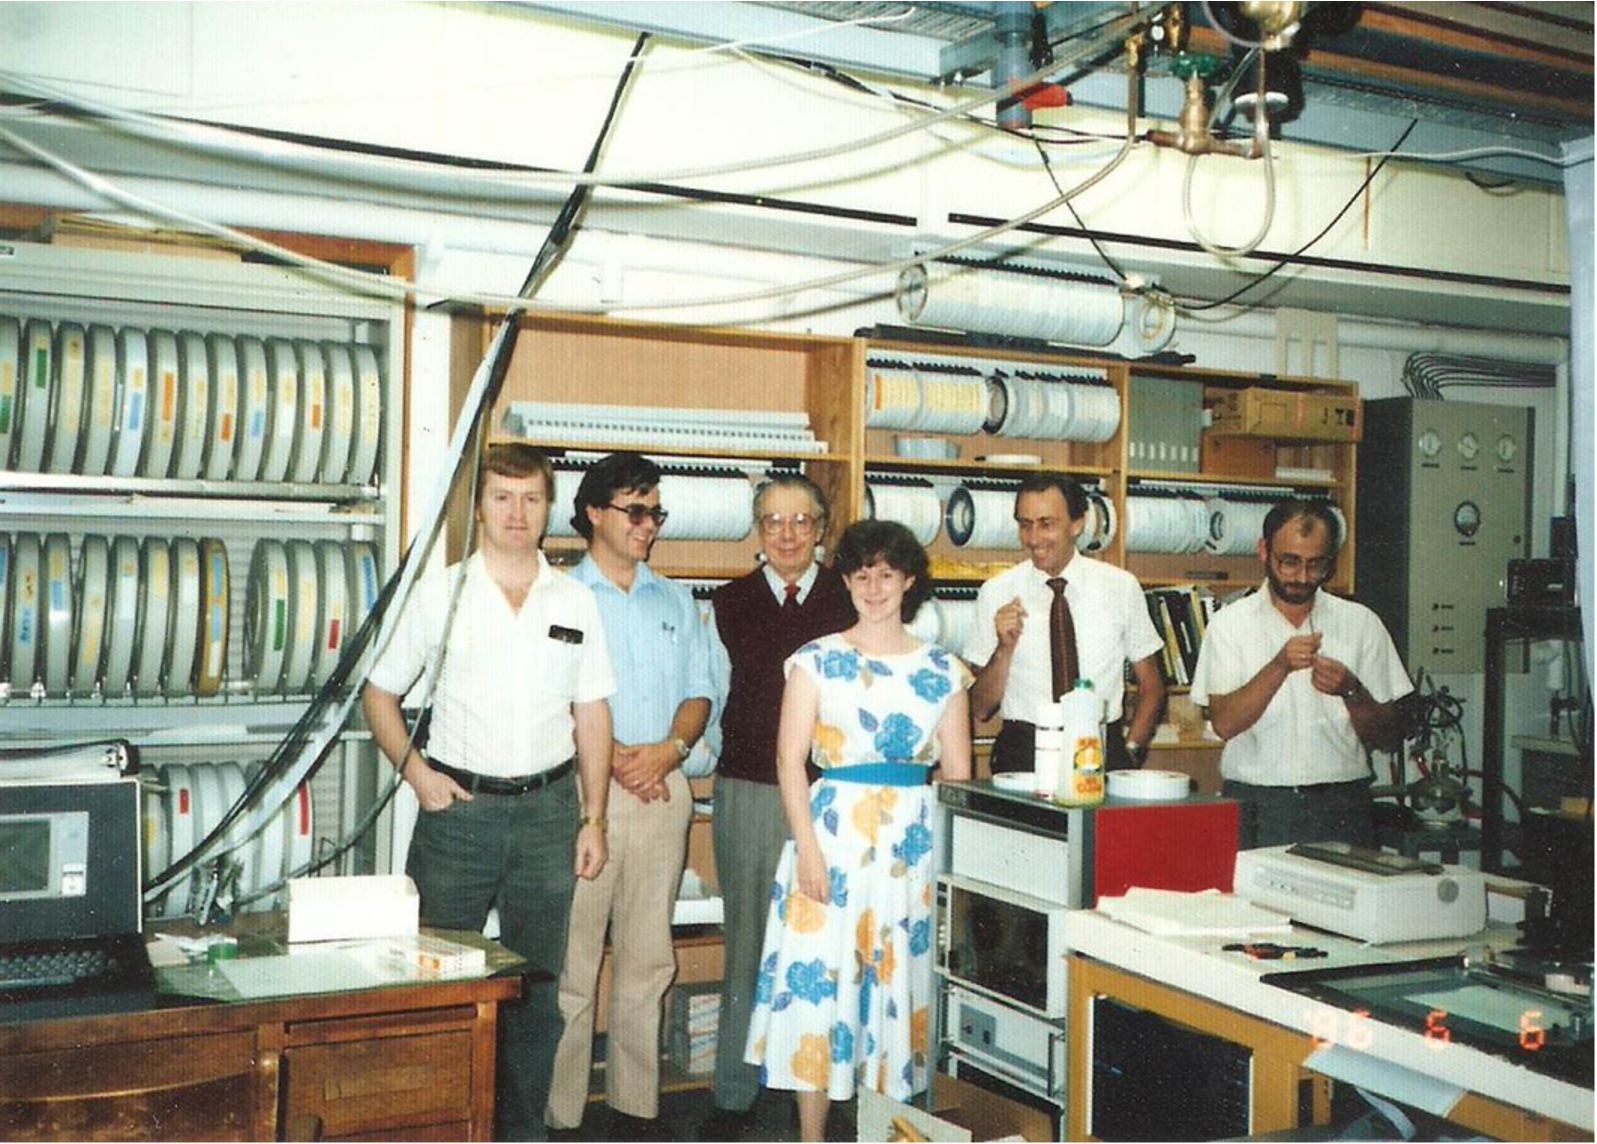 Norman Jones drops in on his former lab. Left to right: D. Moffatt (technician), H. Casal (postdoc), N. Jones (retired emeritus), S. Capes (student), H. Mantsch (author) and S. Surewicz (research associate). Note the NOVA data station in the foreground and the rack of magnetic tapes and disks in the background (personal photograph). (Colors are visible in the online version of the article; http://dx.doi.org/10.3233/BSI-150118.)